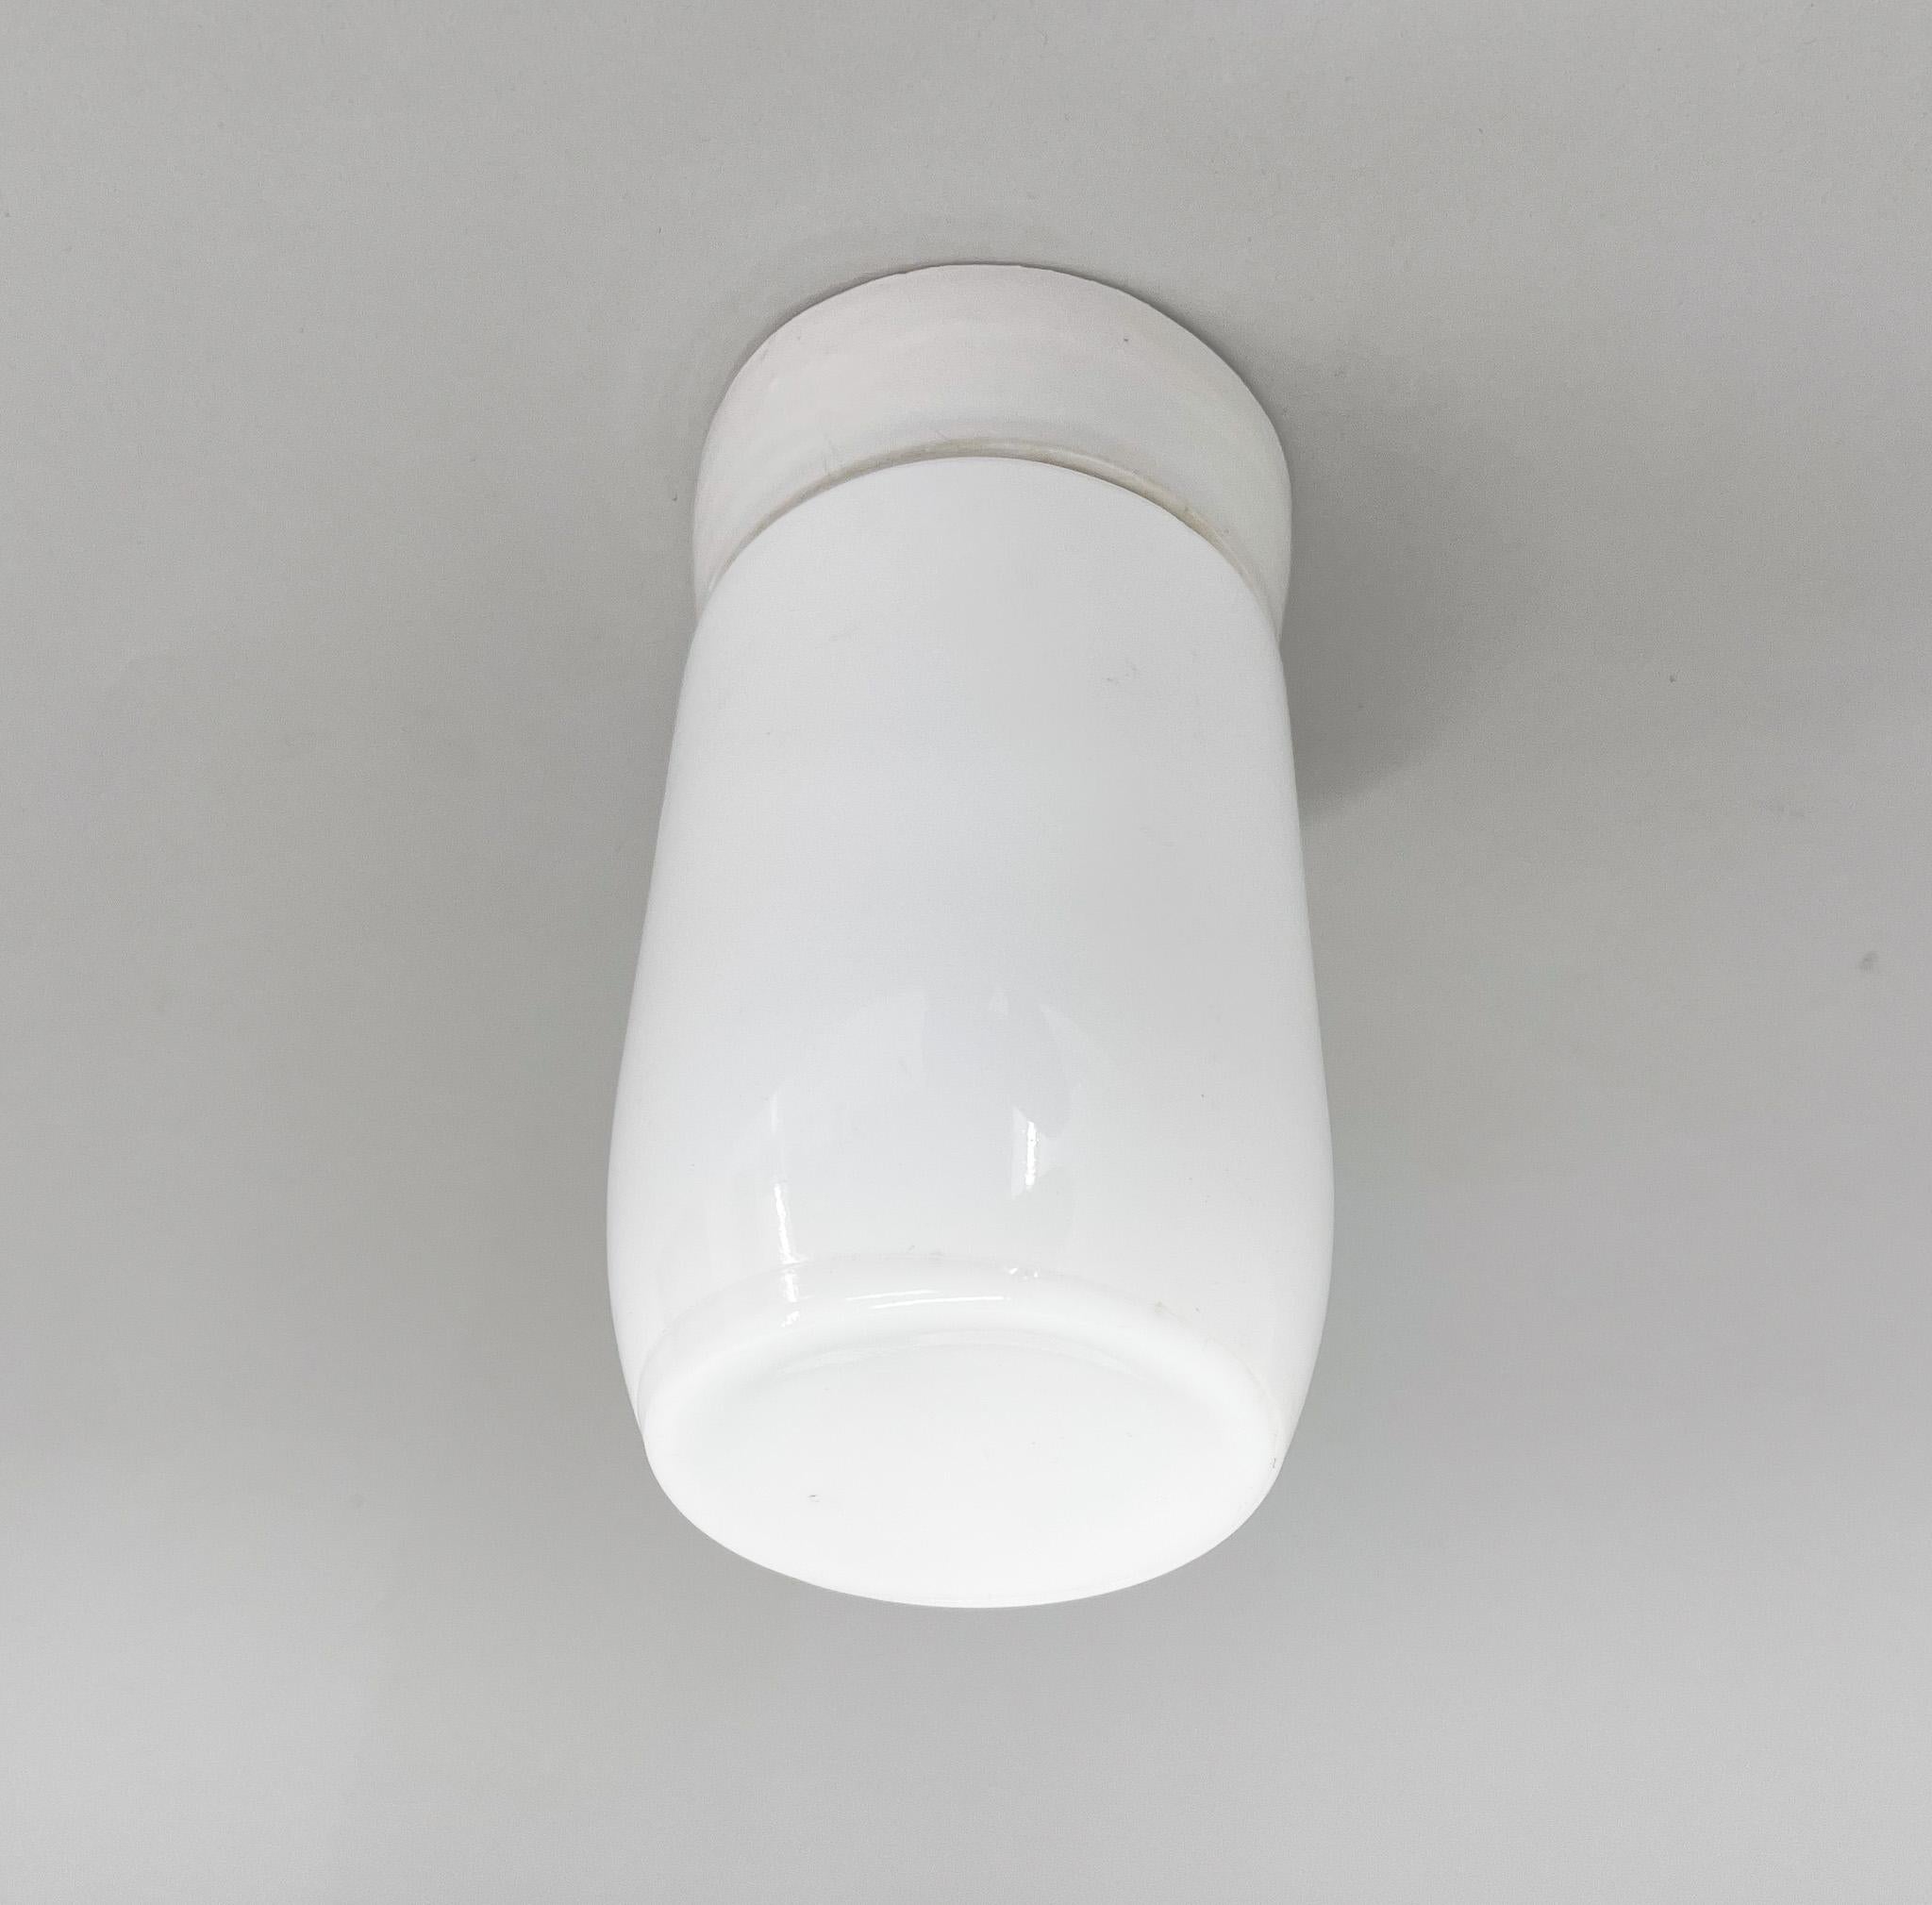 Mid-century ceiling light made of ceramic base and opaline glass shade. New wiring. Bulb: 1 x E26 or E27. US wiring compatible.